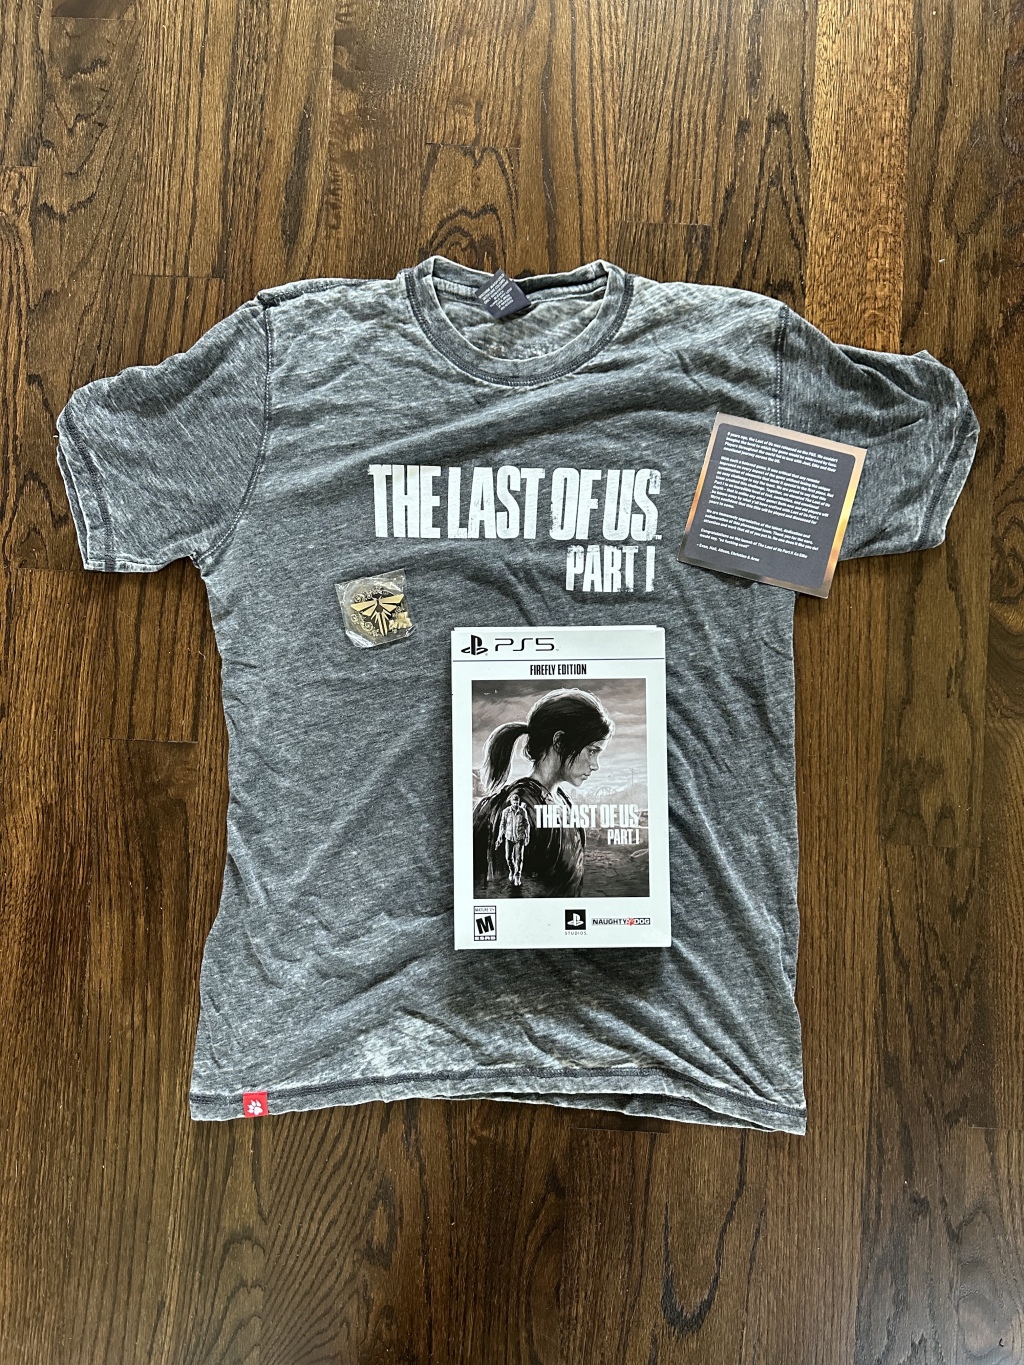 Release Day Dev gifts for The Last of Us Part I Remake